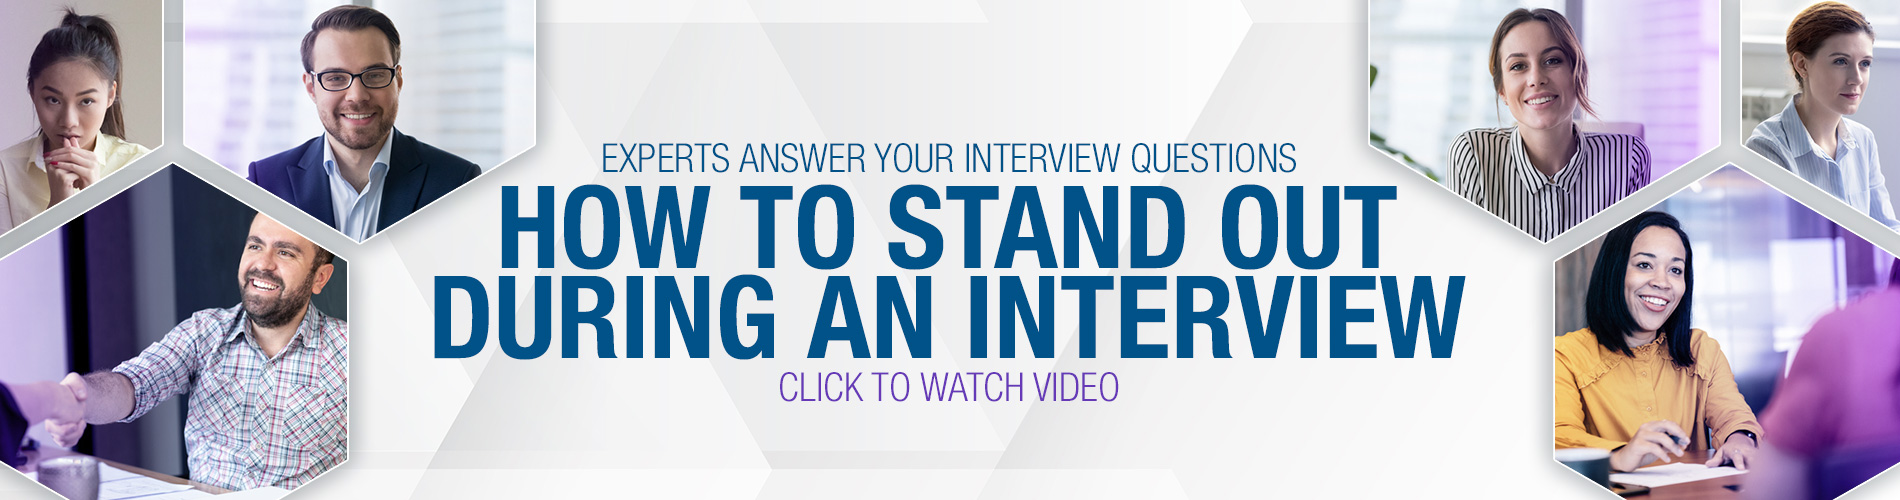 Express Jobs How To Stand Out During An Interview